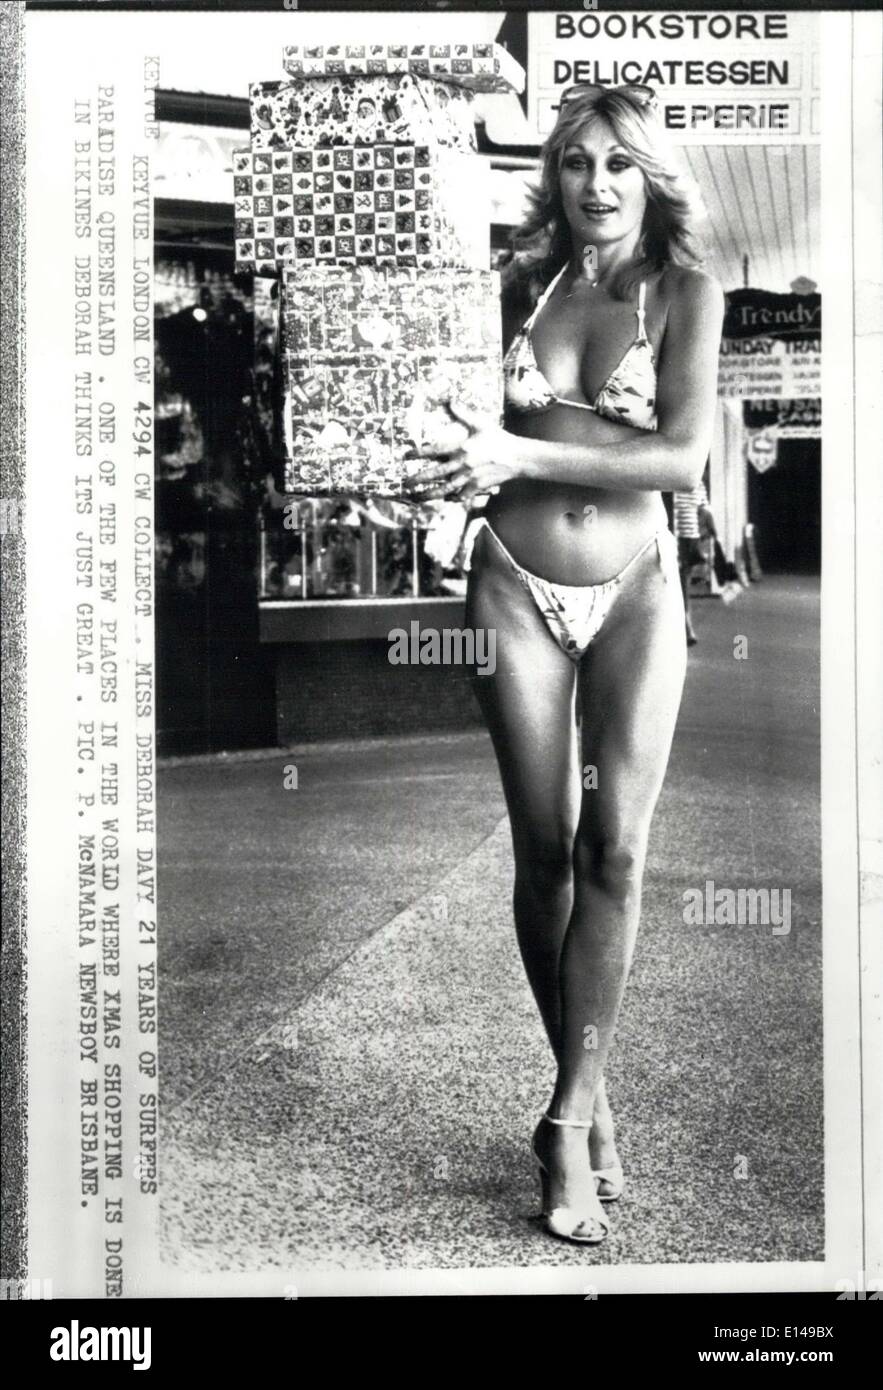 Apr. 17, 2012 - Miss Deborah Davy 21 years of Surfers Paradise Queensland. One of the few places in the world where Xmas shopping is done in Bikines Deborah thinks its just great. Pic P. Mcnamara newsboy Brisbane. Stock Photo